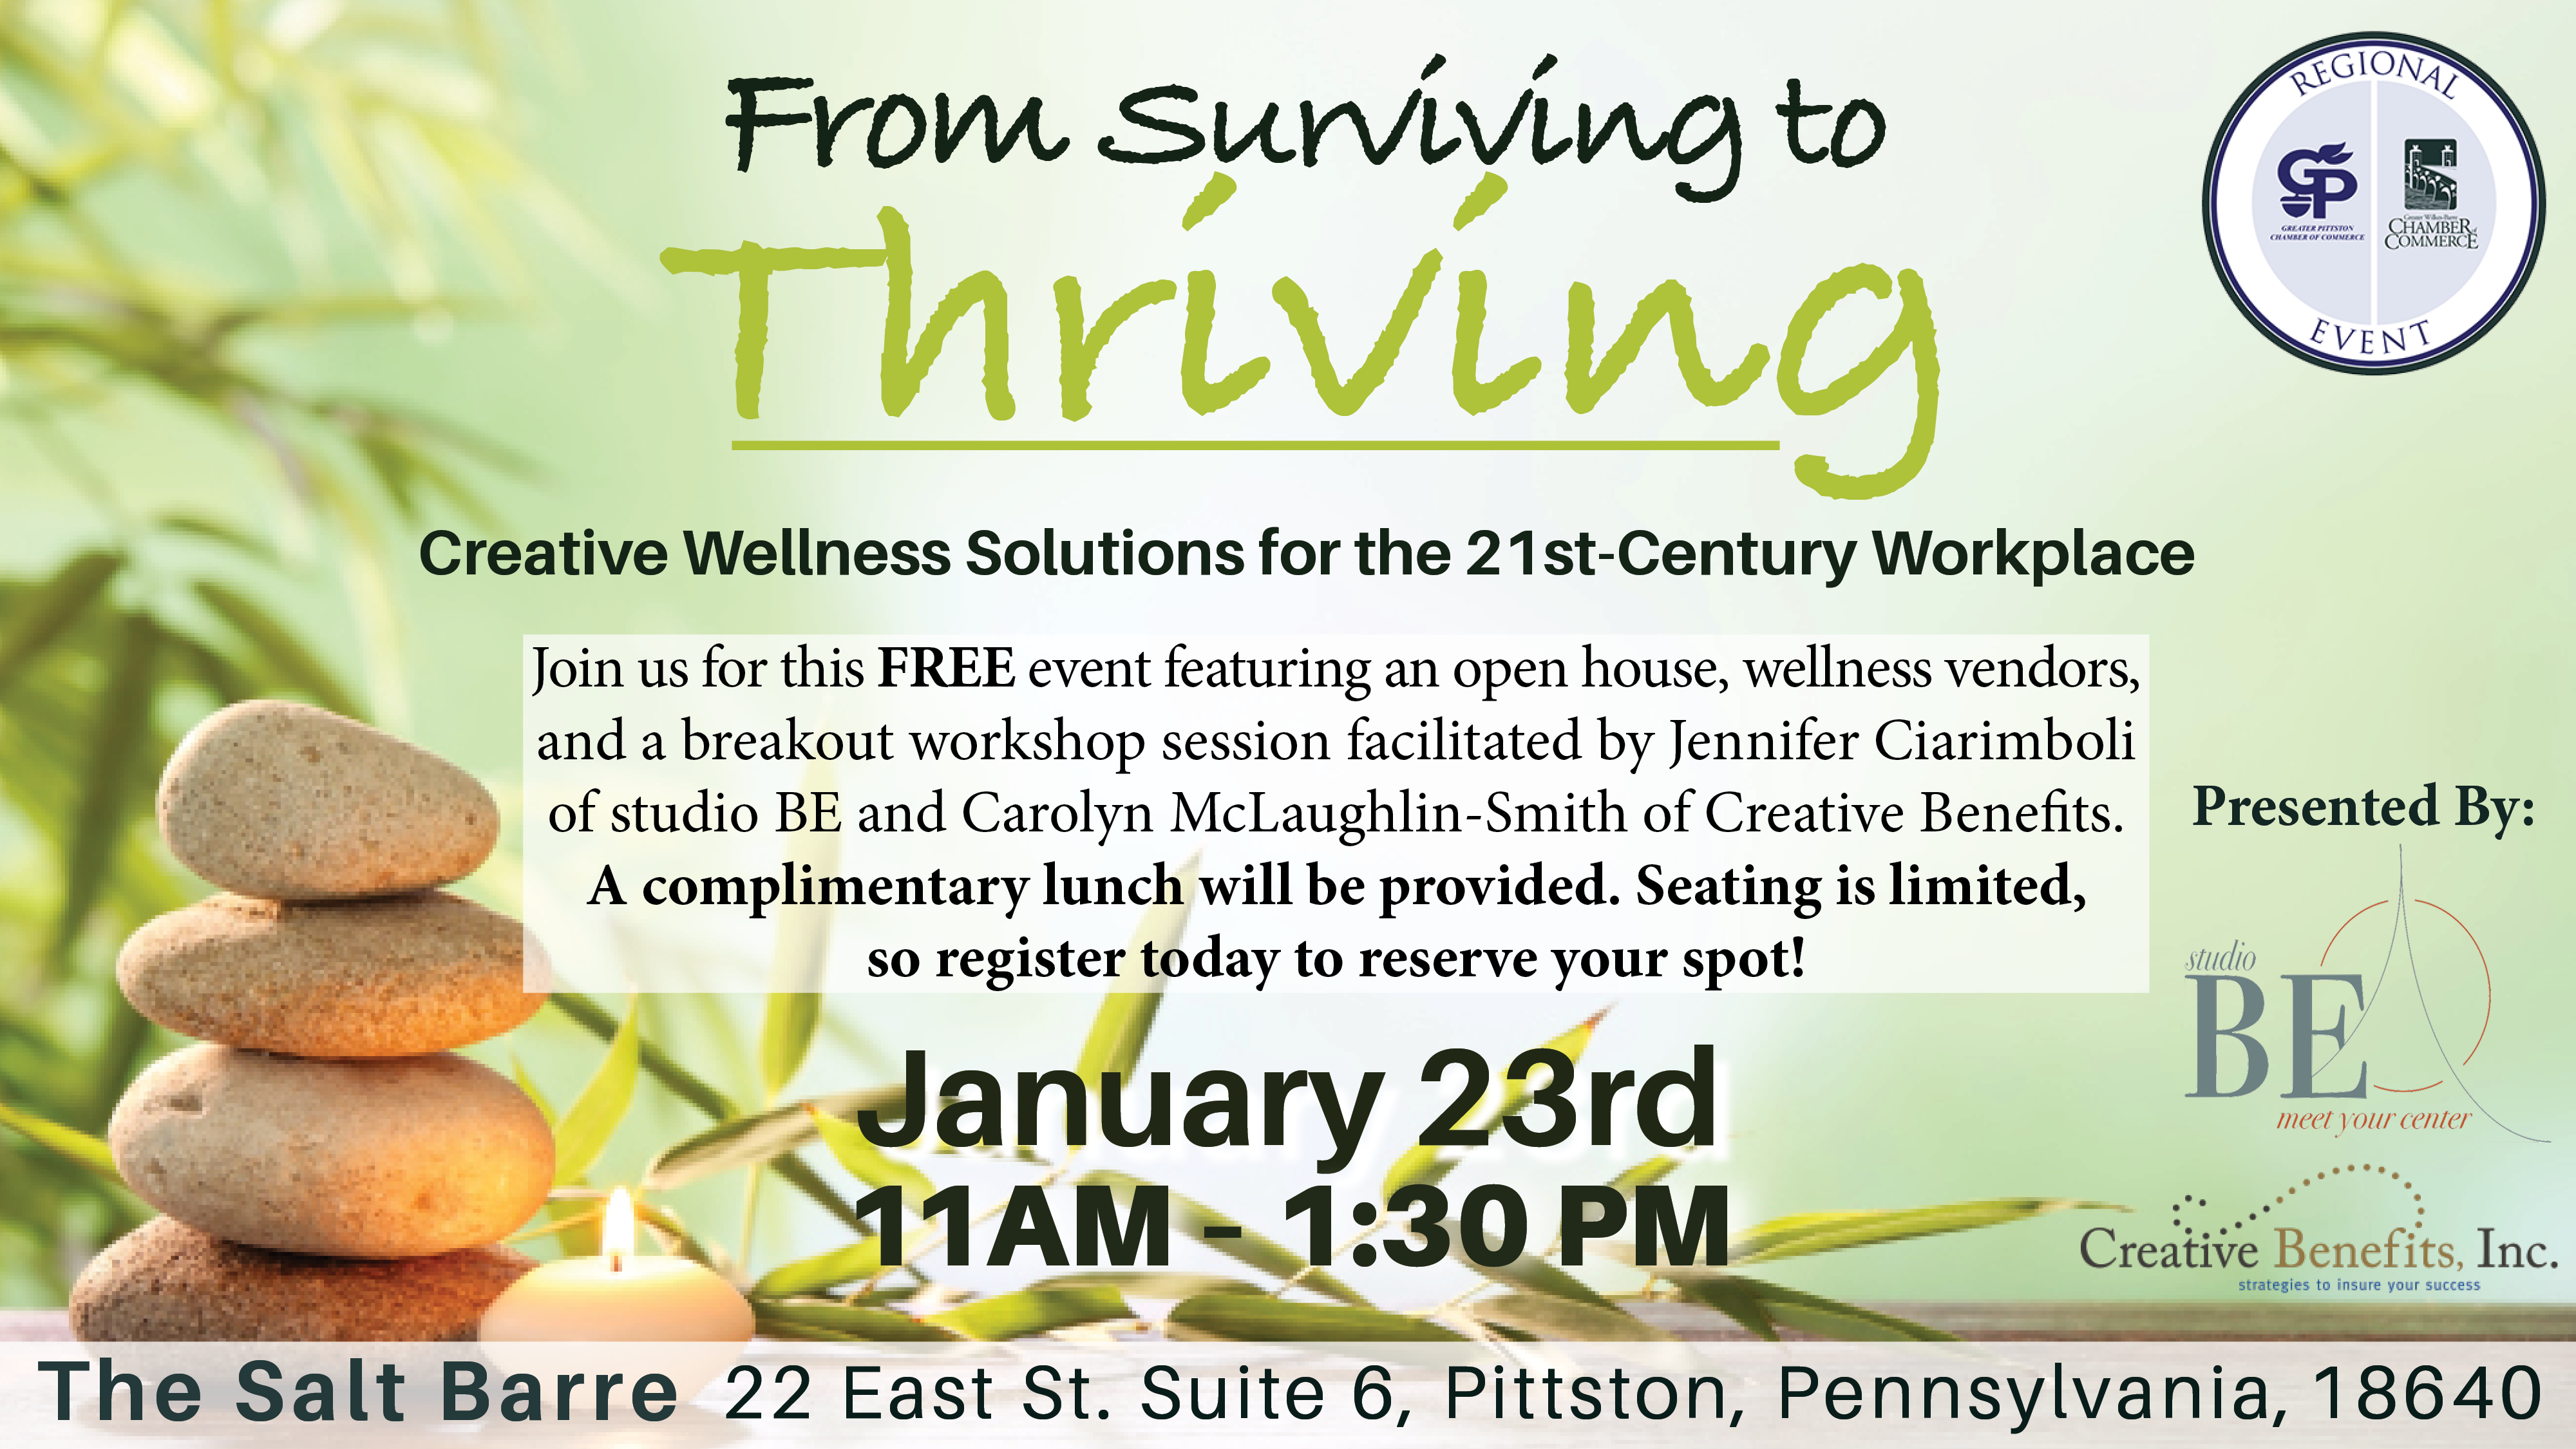 Upcoming Event: From Surviving to Thriving